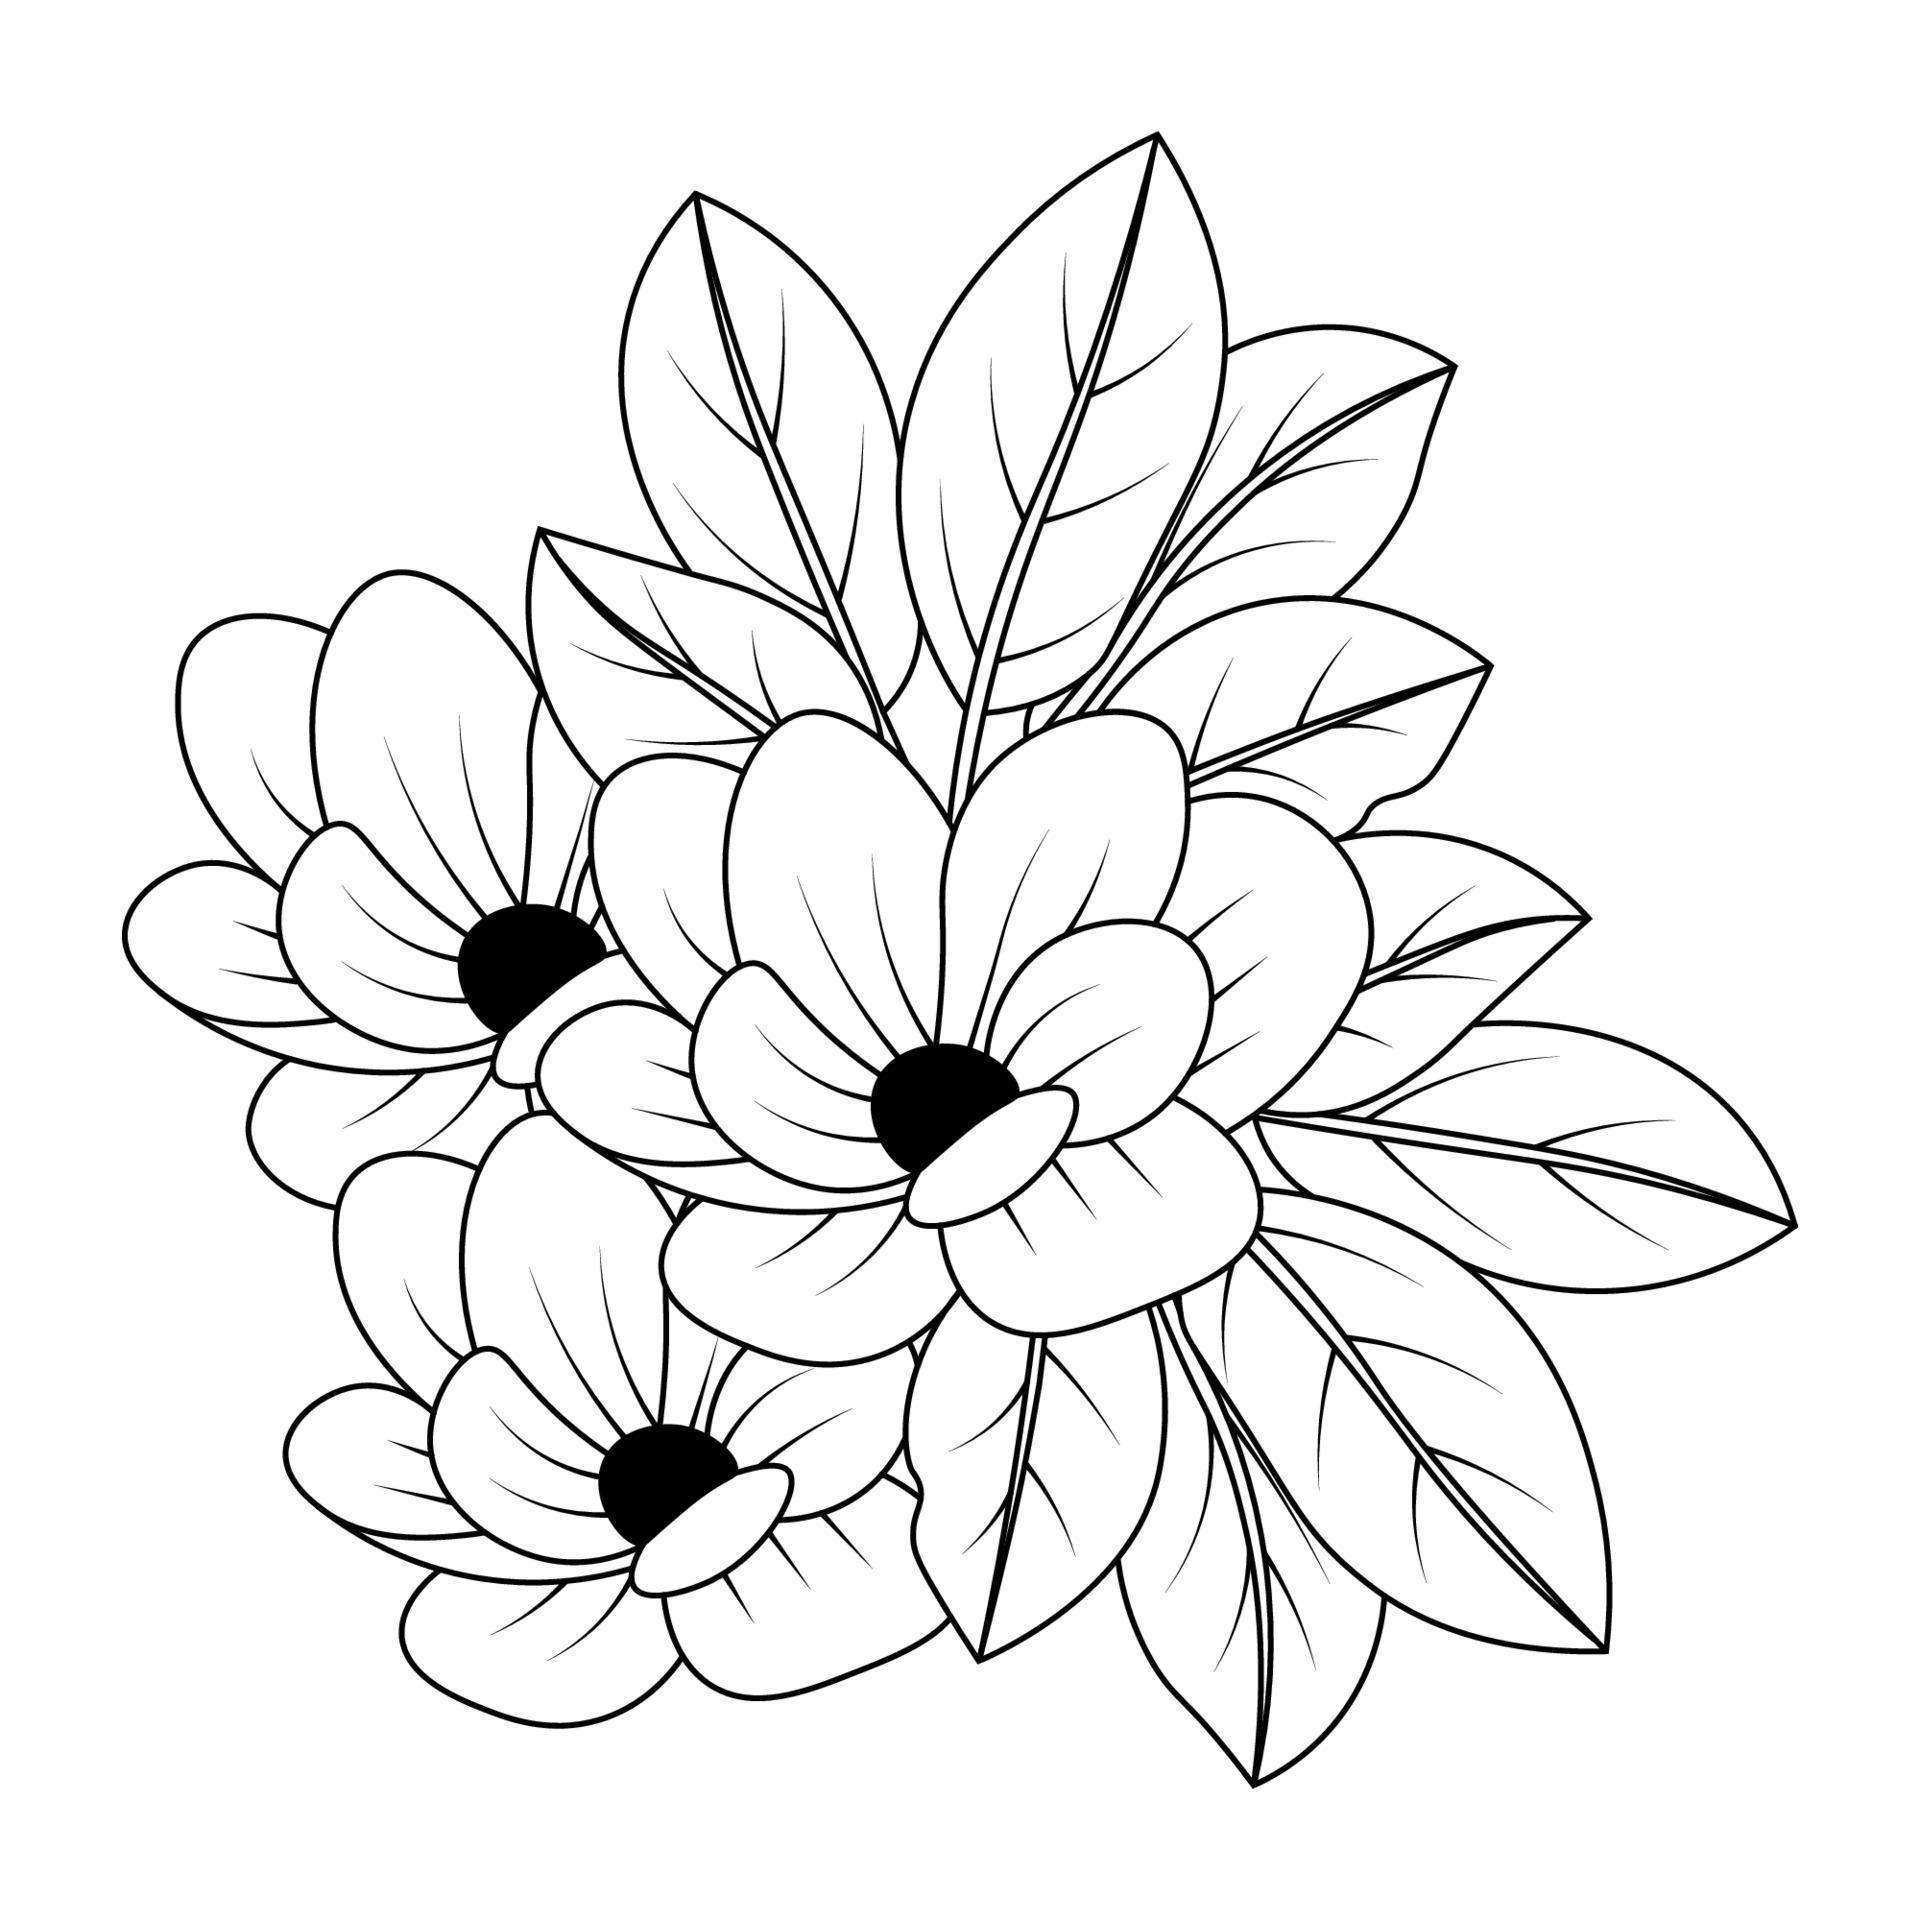 natural flower black and white coloring page illustration outline ...